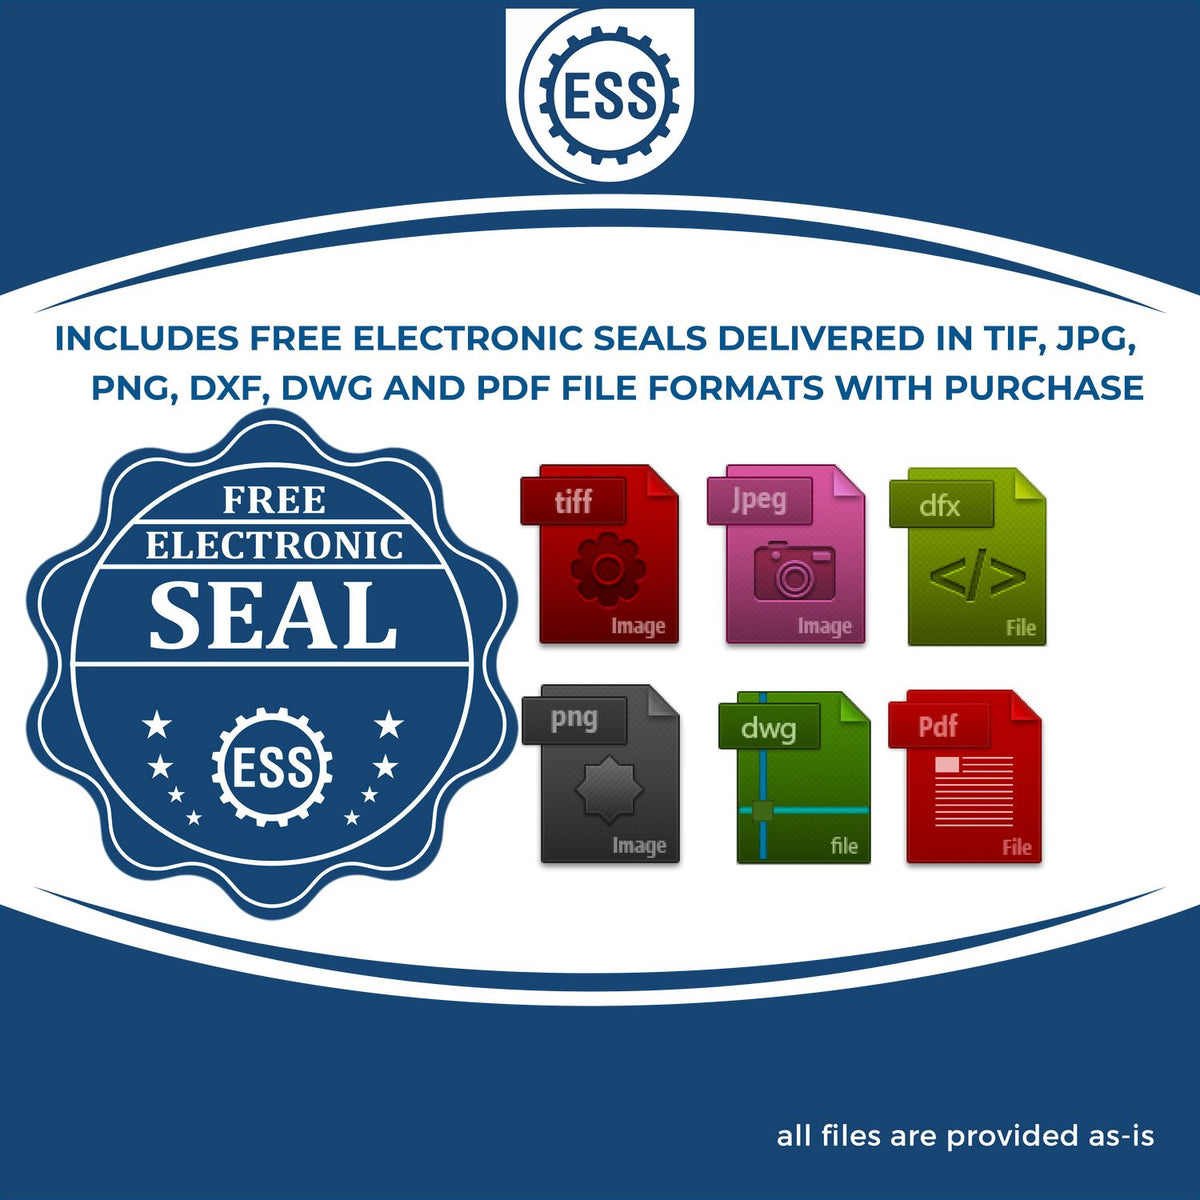 An infographic for the free electronic seal for the Hybrid Minnesota Land Surveyor Seal illustrating the different file type icons such as DXF, DWG, TIF, JPG and PNG.